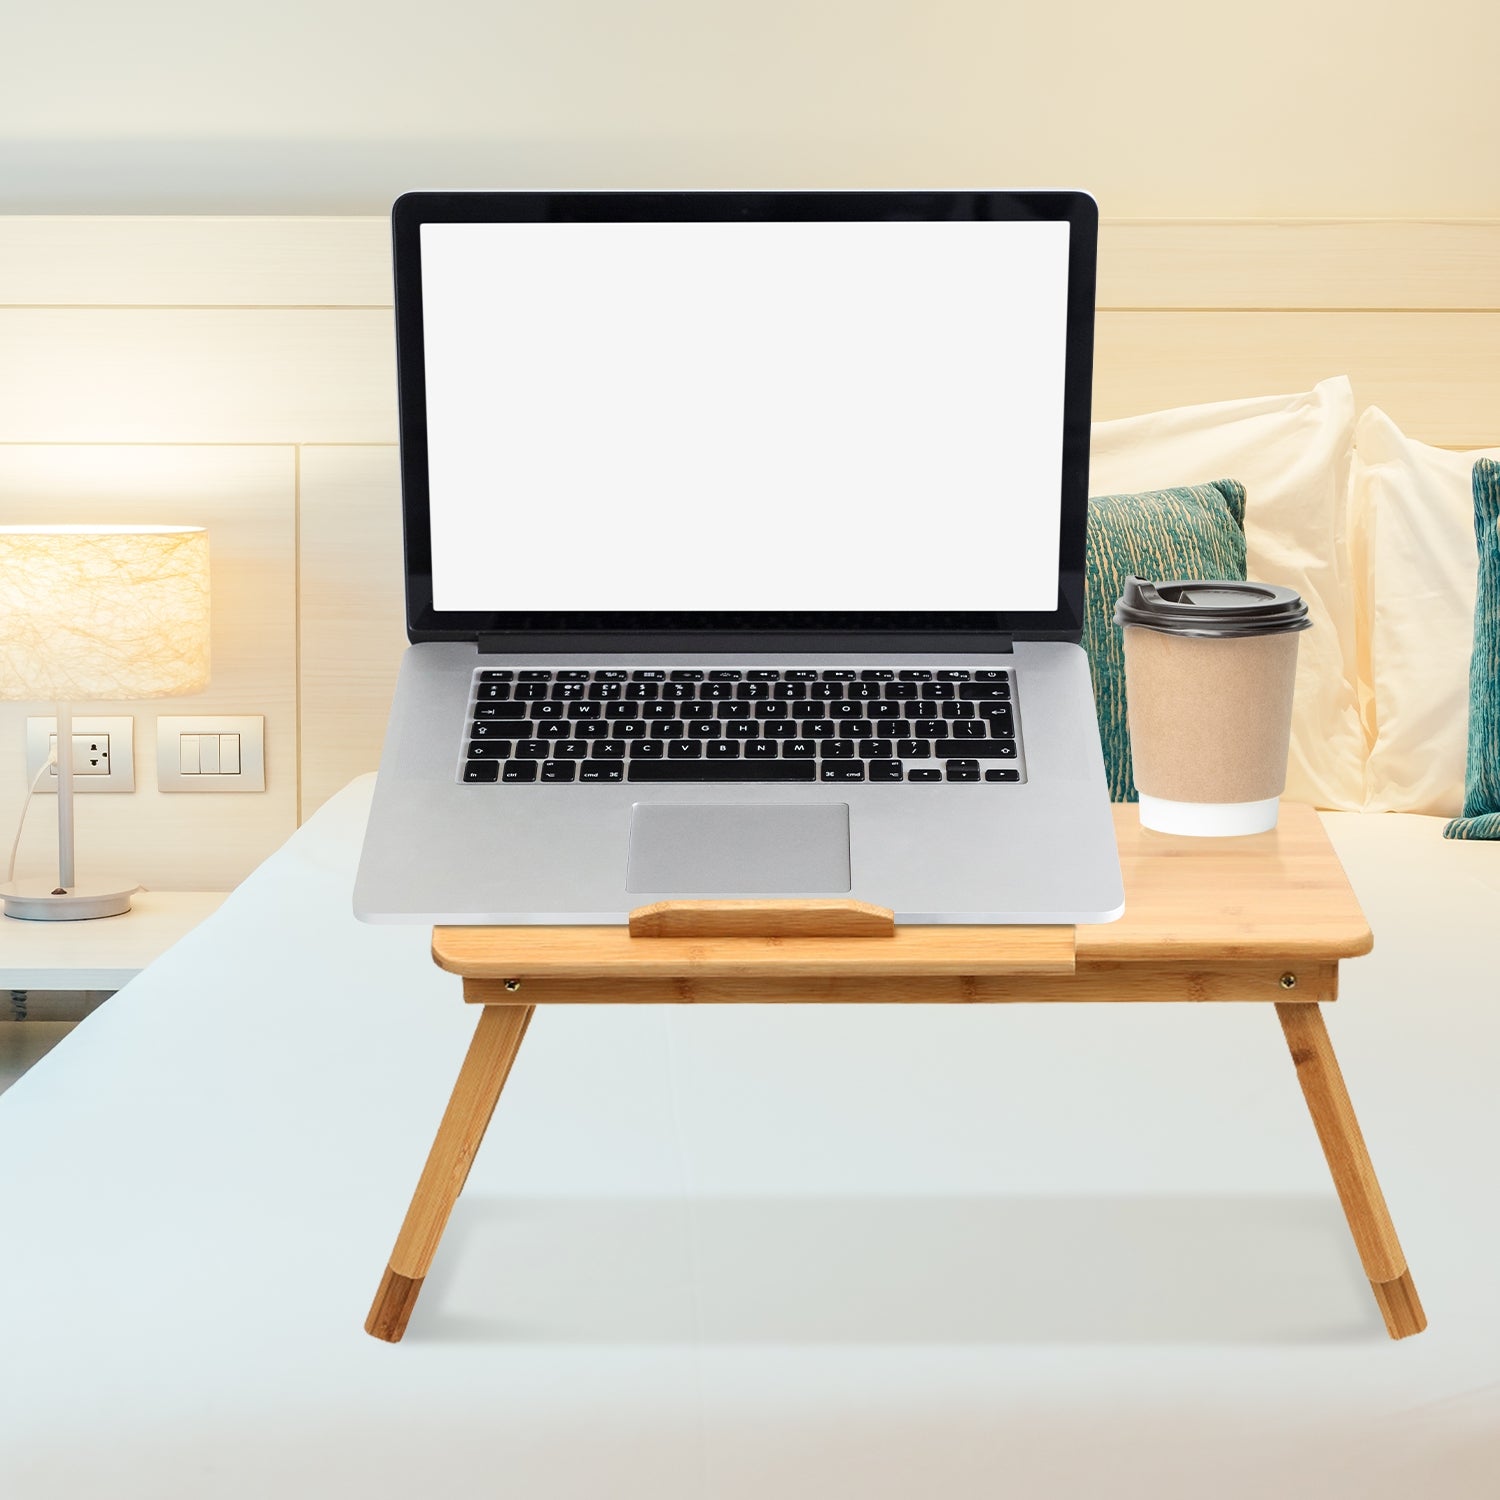 EKKIO Foldable Bamboo Laptop Bed Desk with Handles and Folding Legs